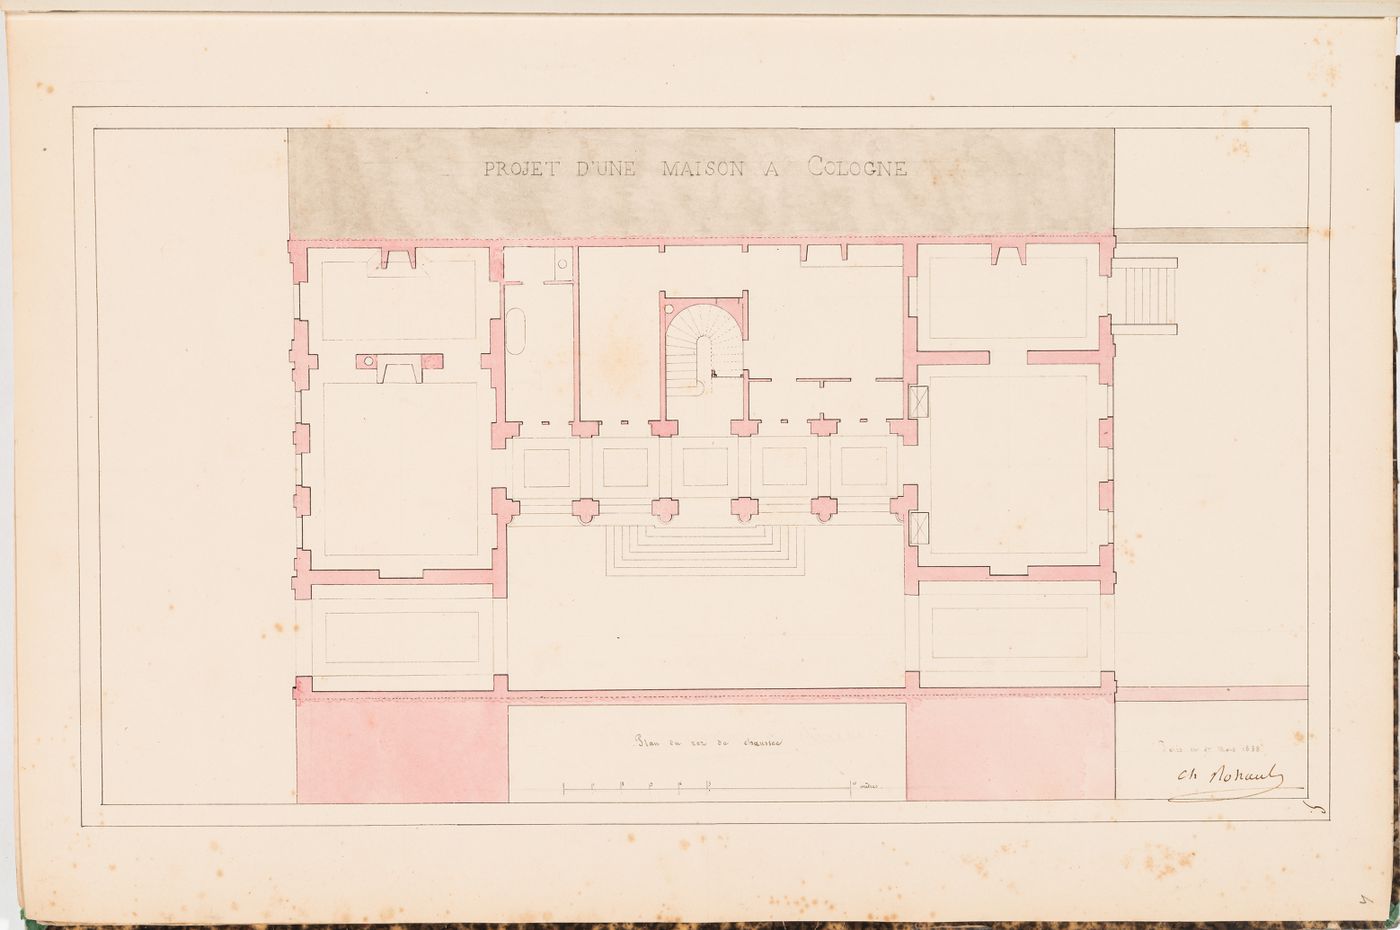 Ground floor plan for a three-storey house, Cologne